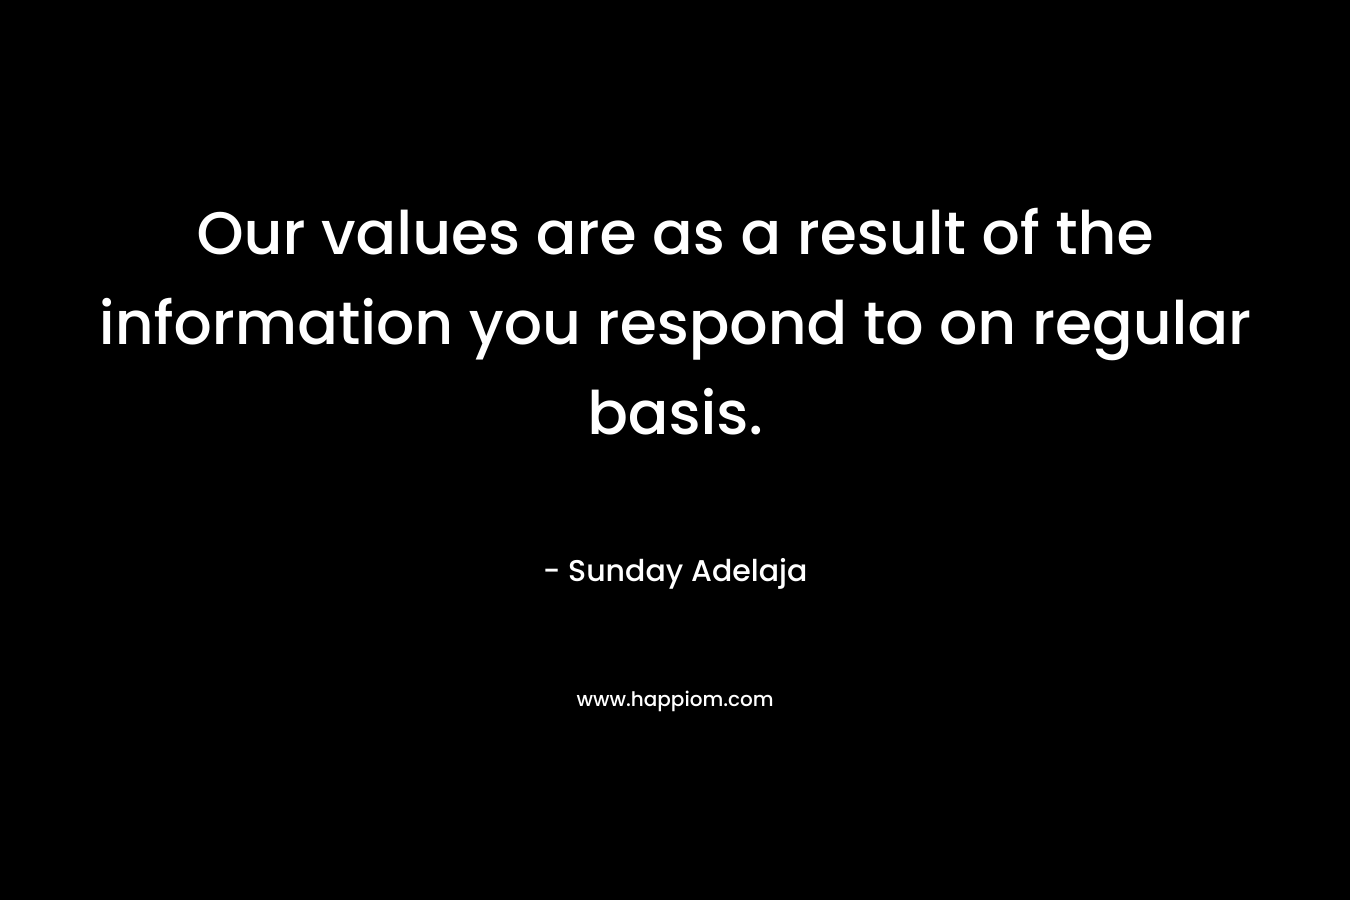 Our values are as a result of the information you respond to on regular basis.